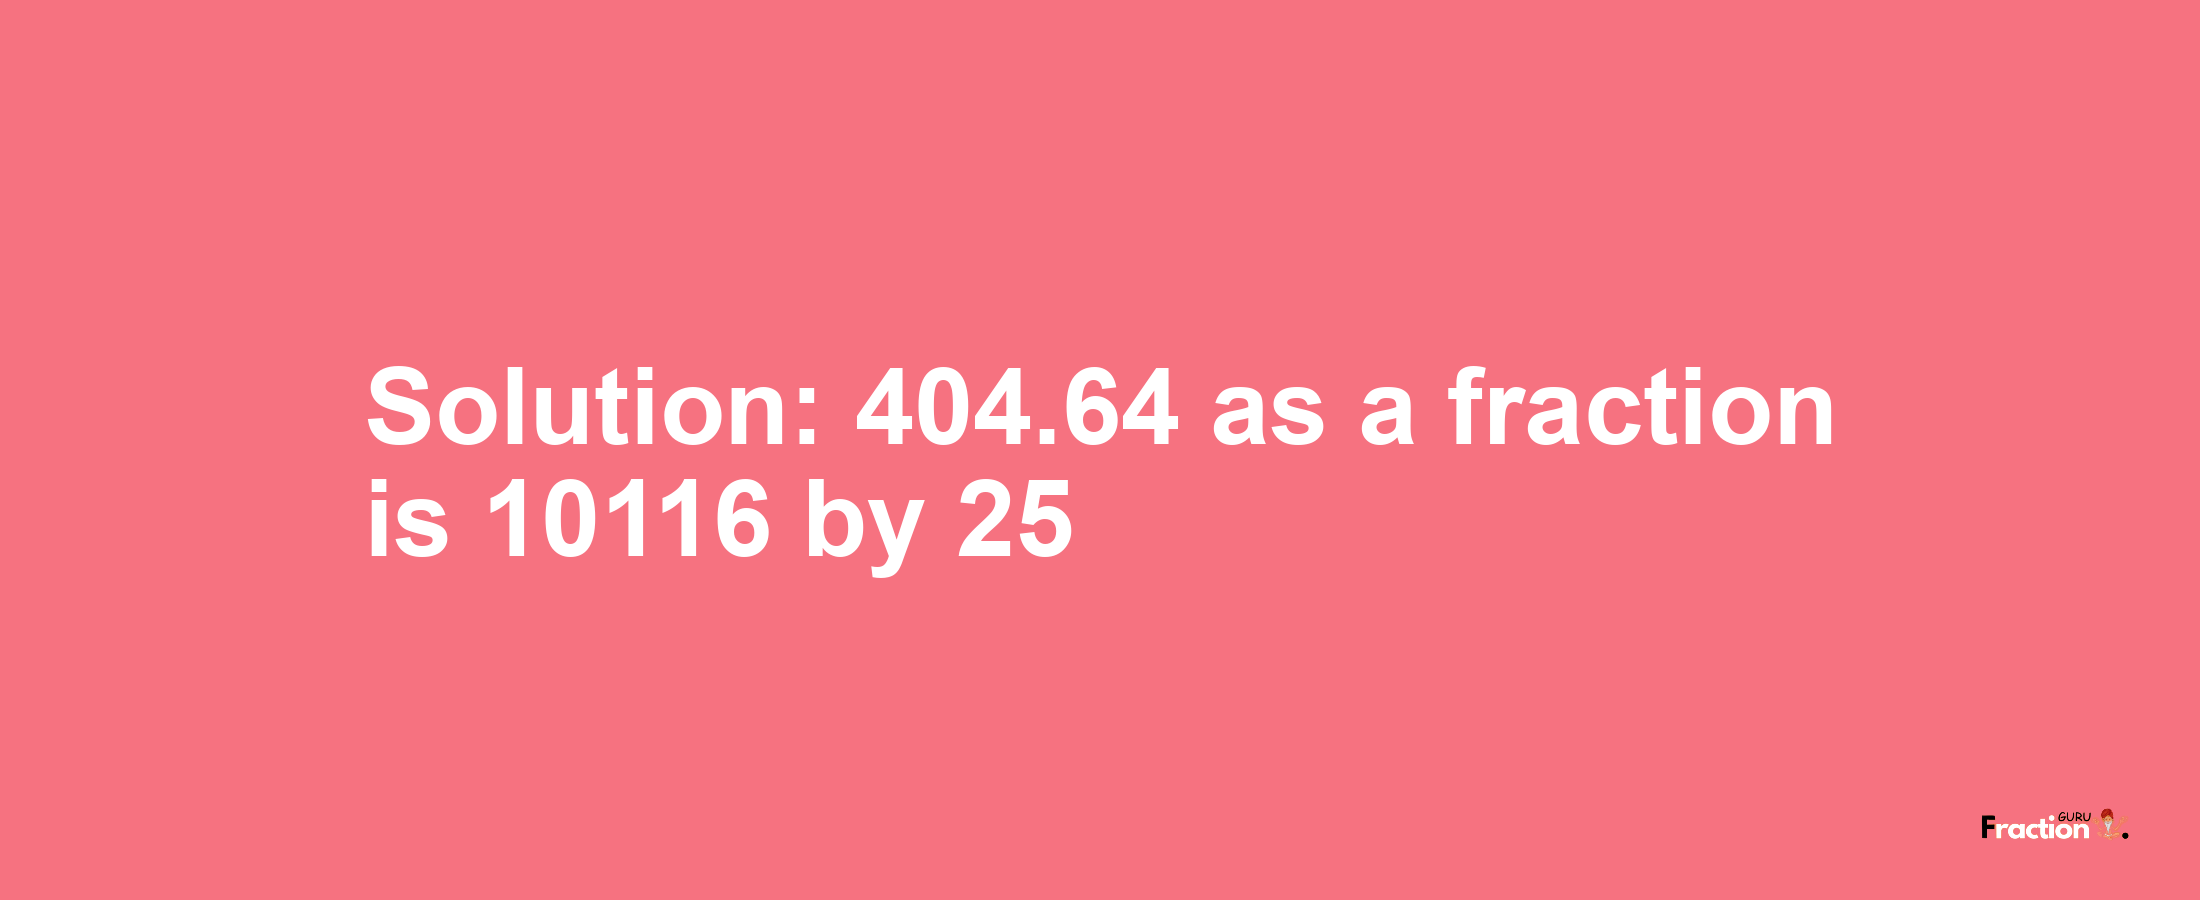 Solution:404.64 as a fraction is 10116/25